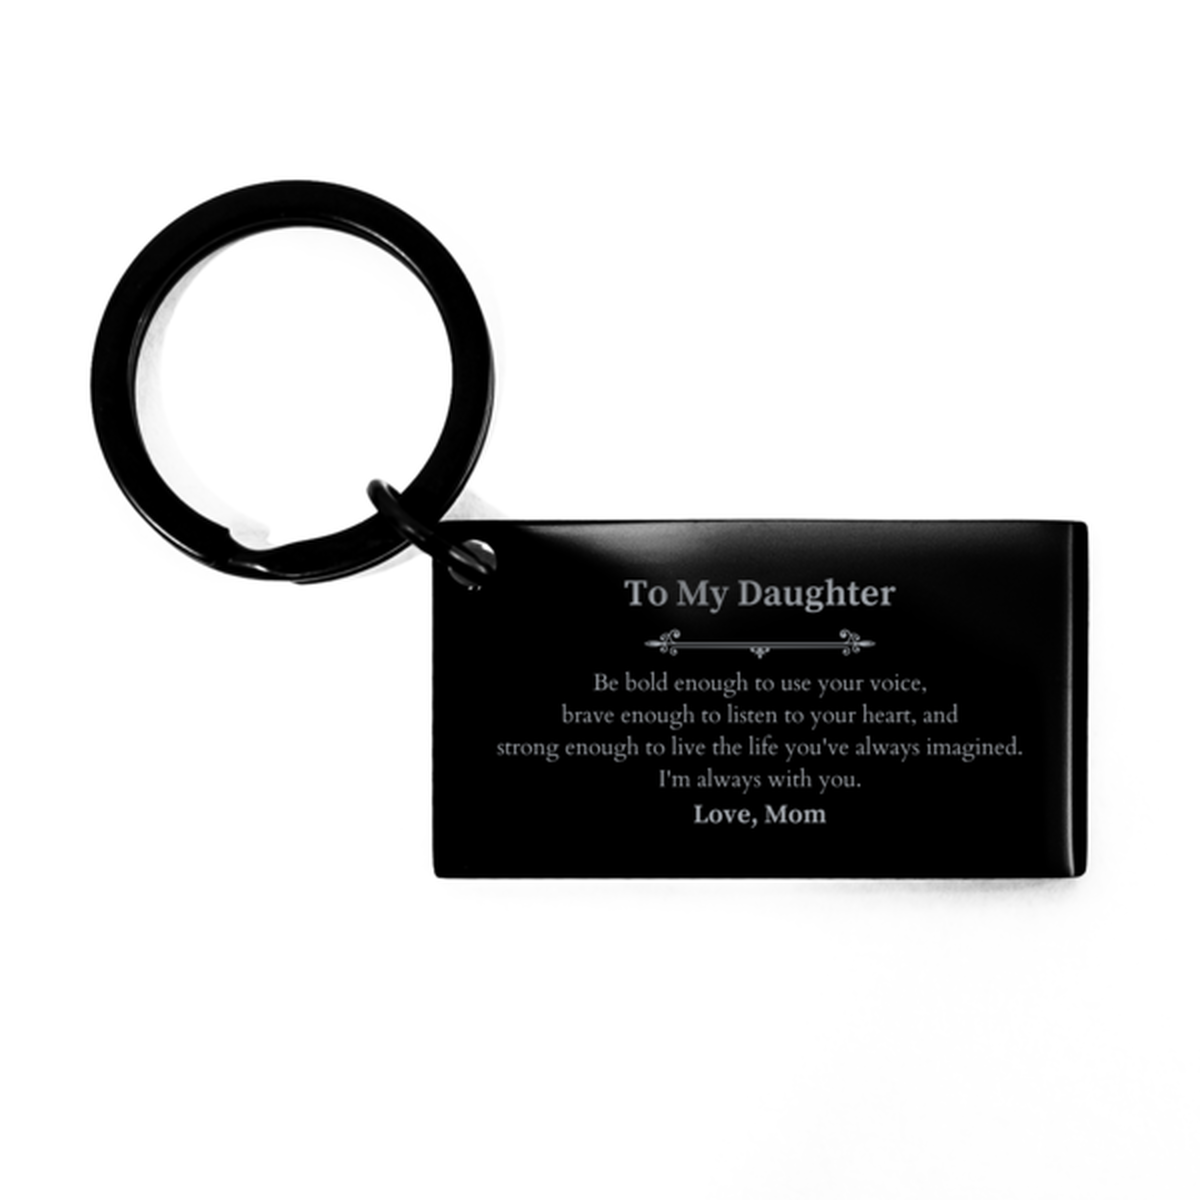 Keepsake Daughter Keychain Gift Idea Graduation Christmas Birthday Daughter from Mom, Daughter Be bold enough to use your voice, brave enough to listen to your heart. Love, Mom